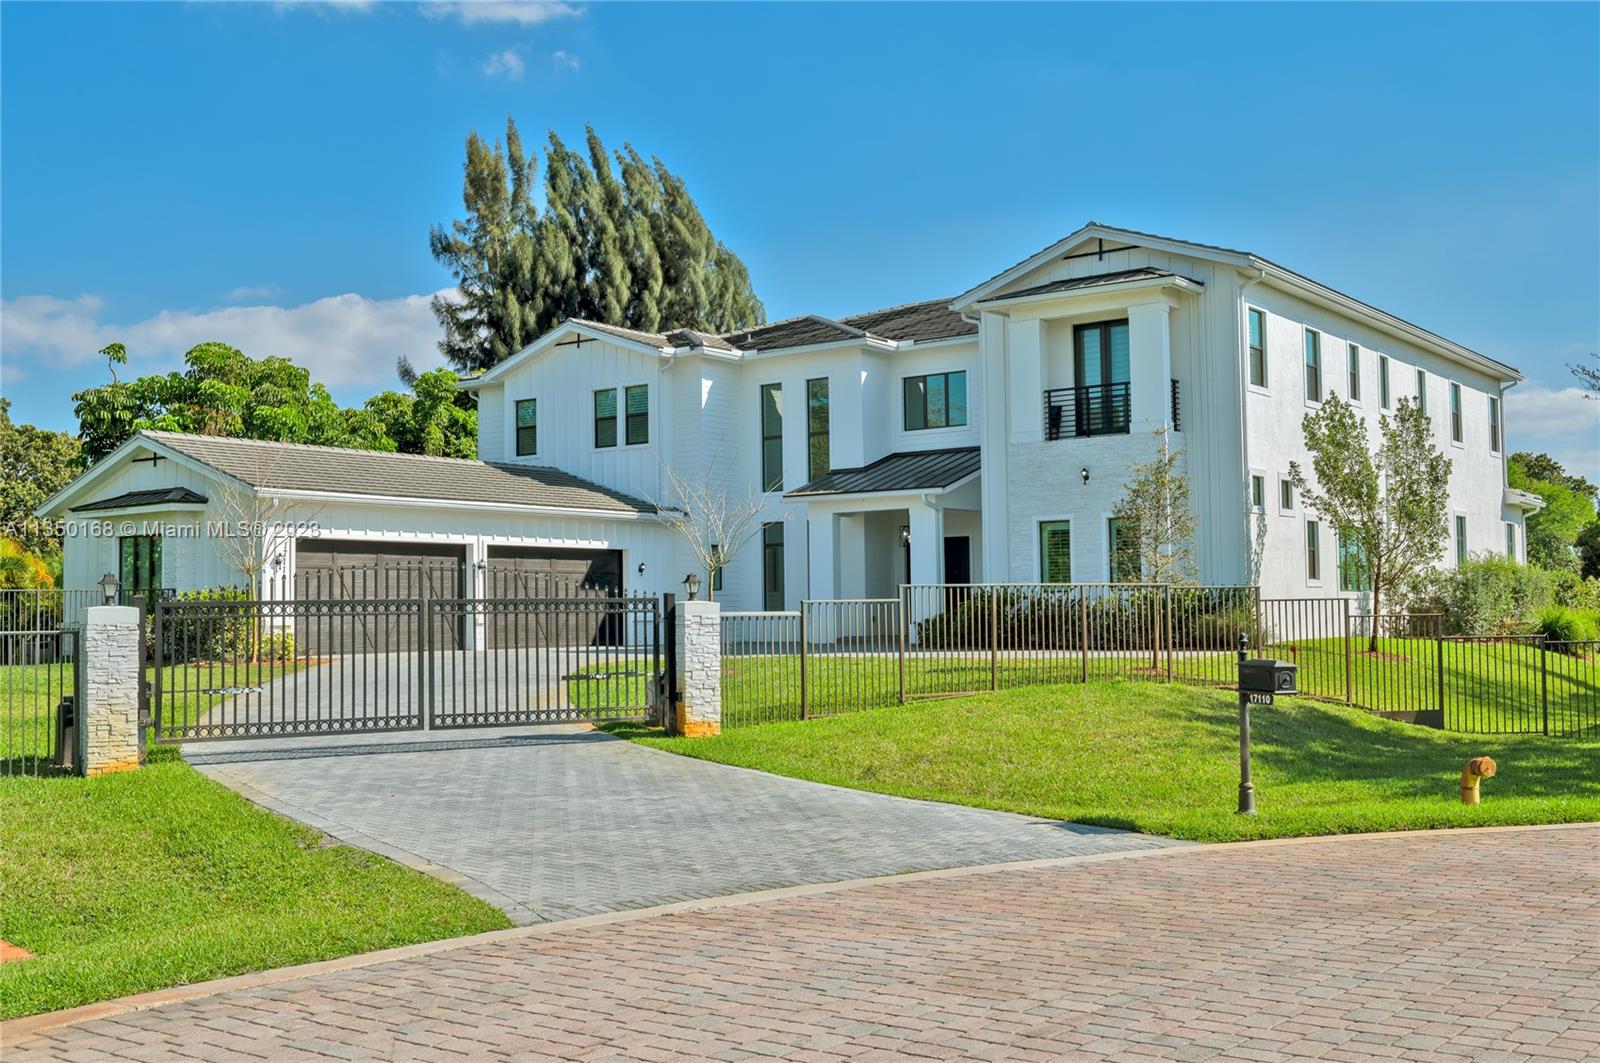 17110 Reserve Ct, Southwest Ranches, Broward County, Florida - 6 Bedrooms  
6.5 Bathrooms - 